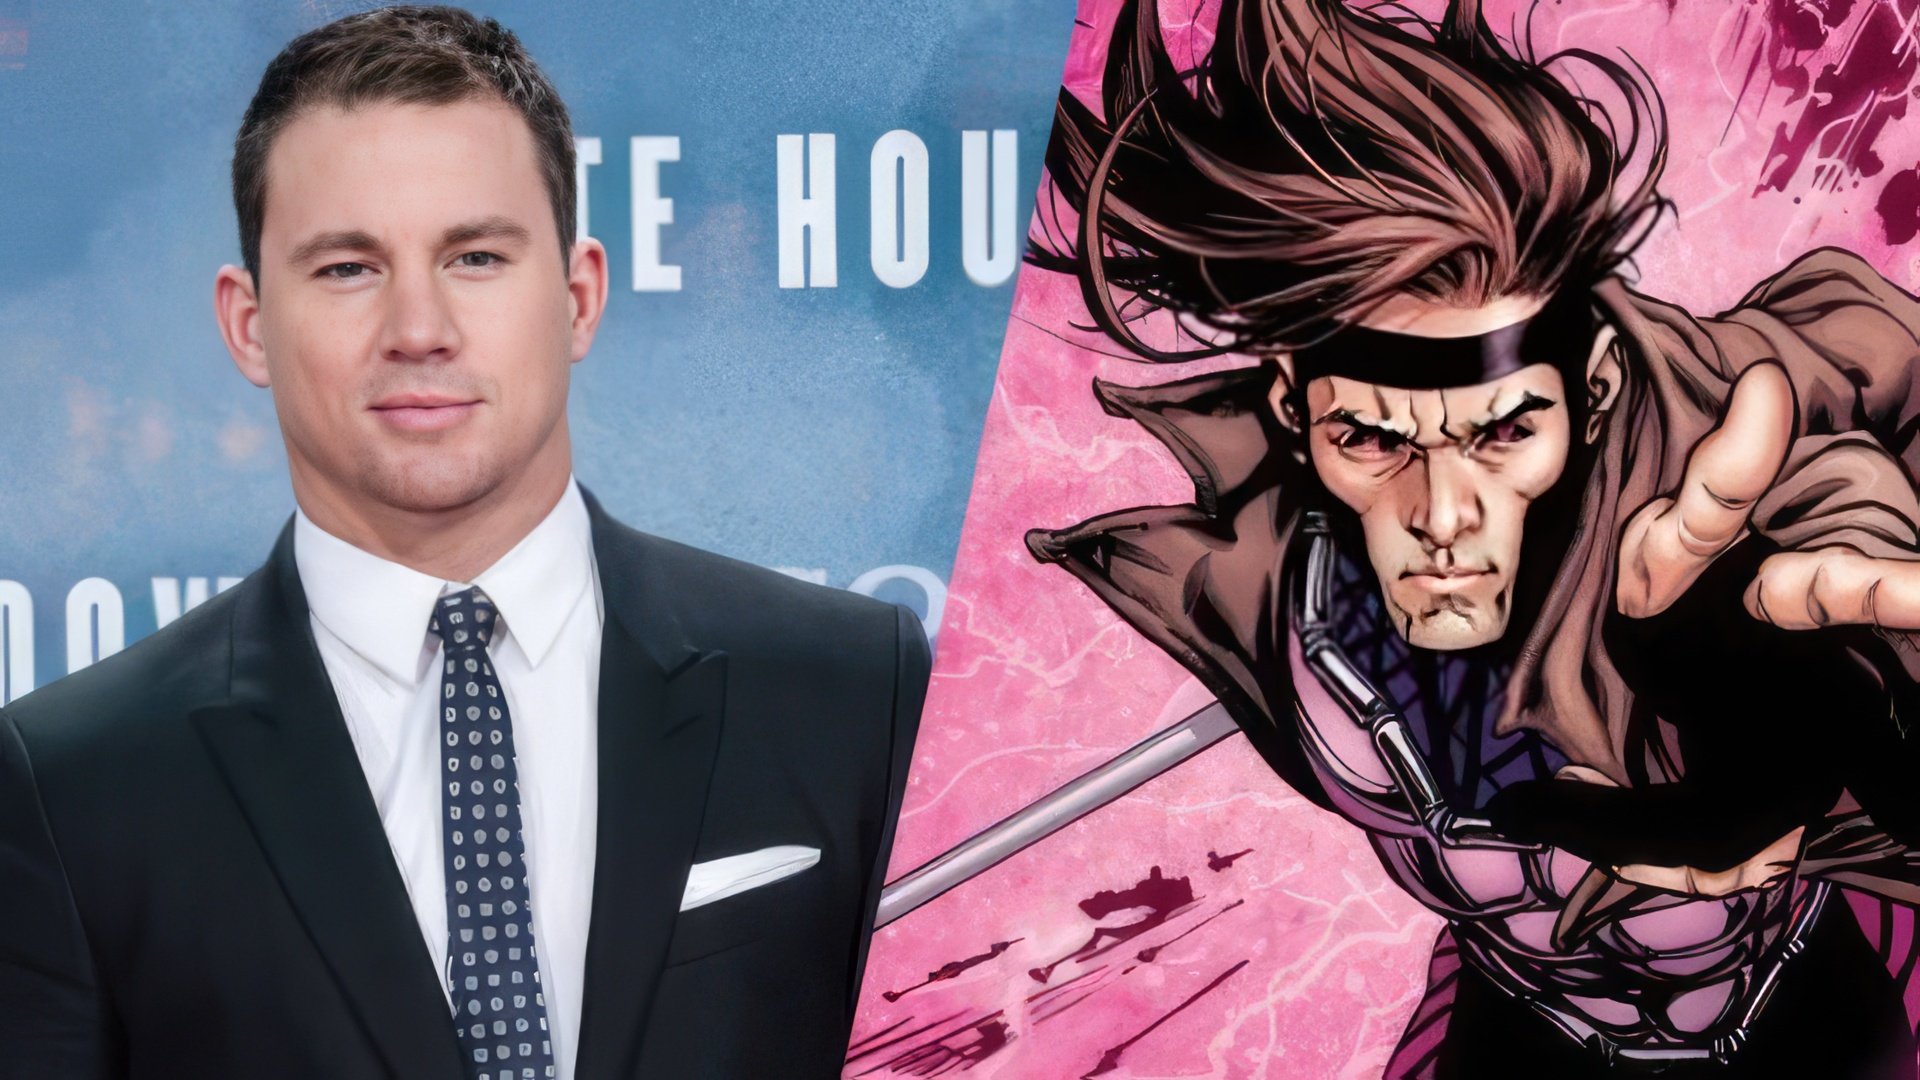 Channing Tatum was supposed to play Gambit from 'X-Men'